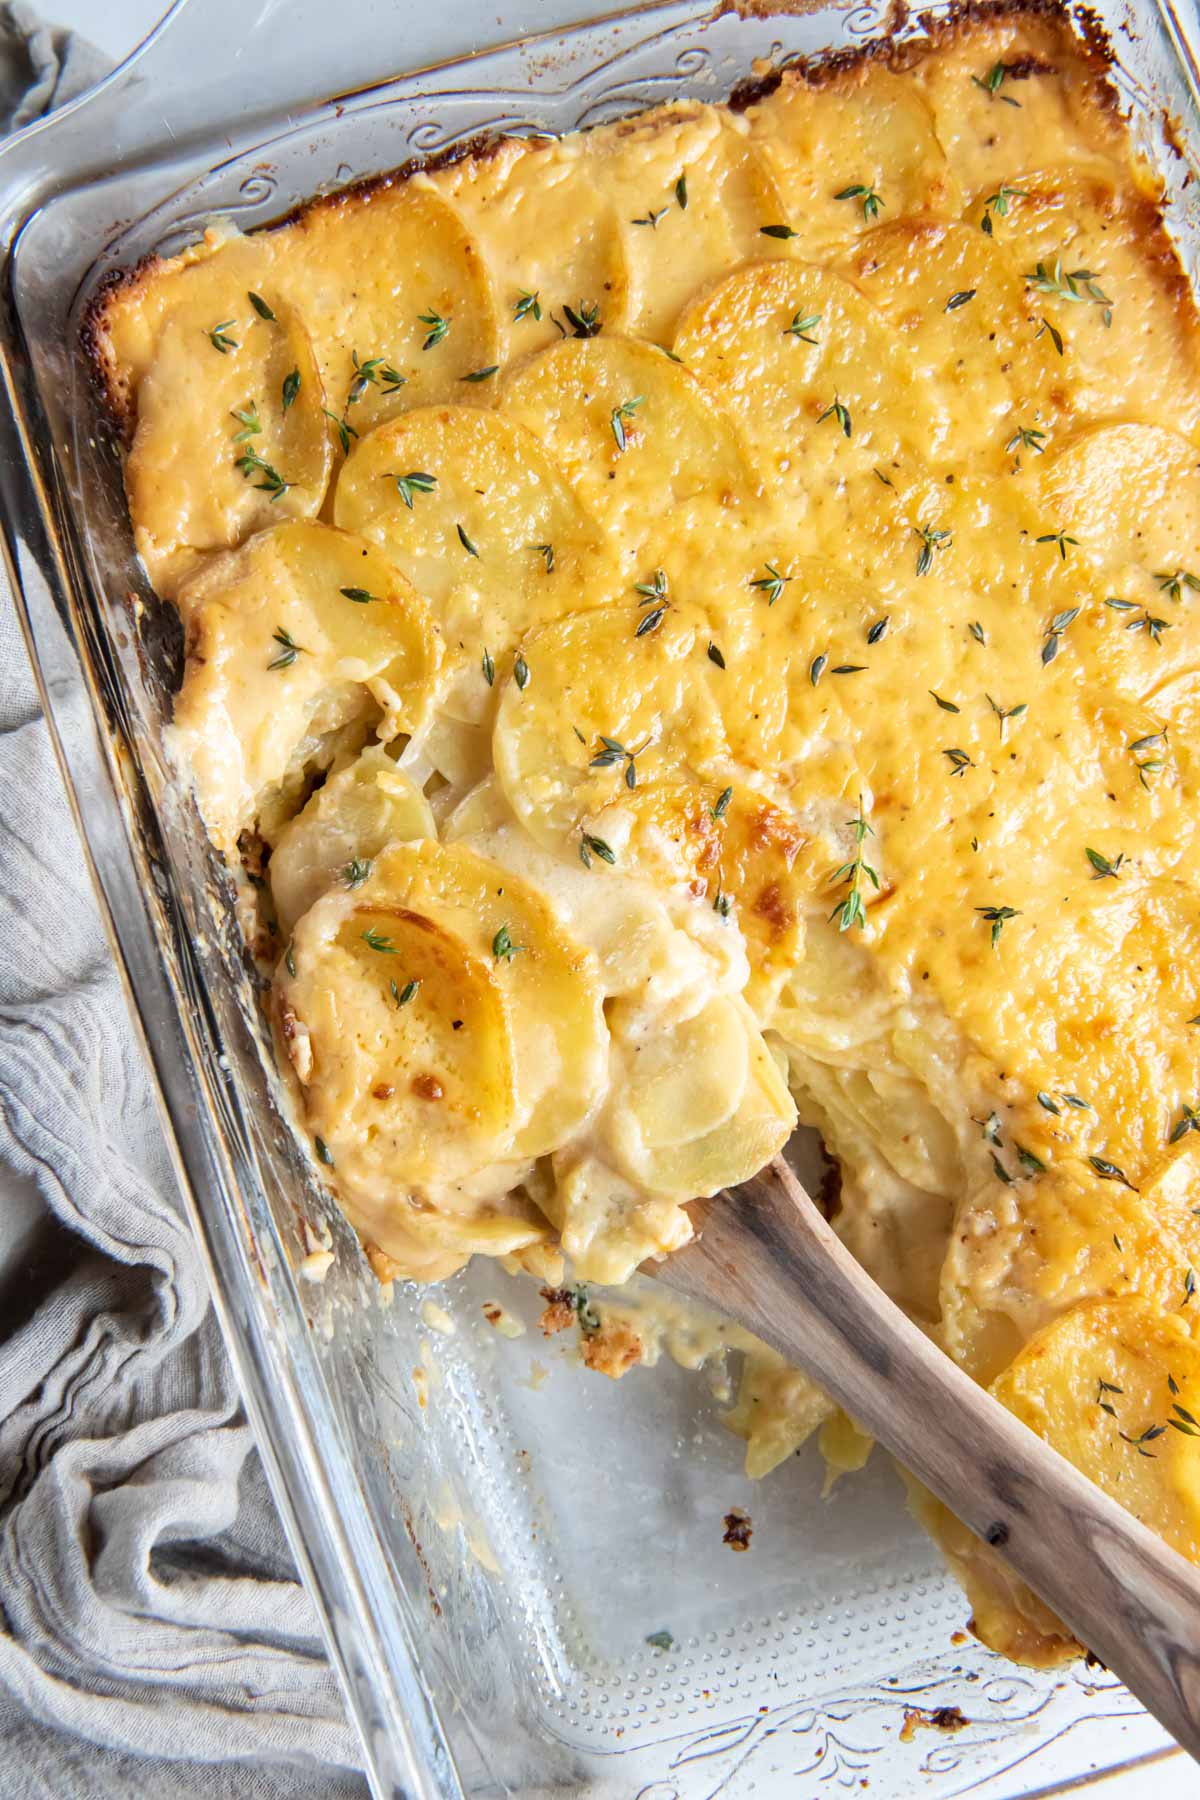 Scalloped potatoes in baking dish with serving spoon.